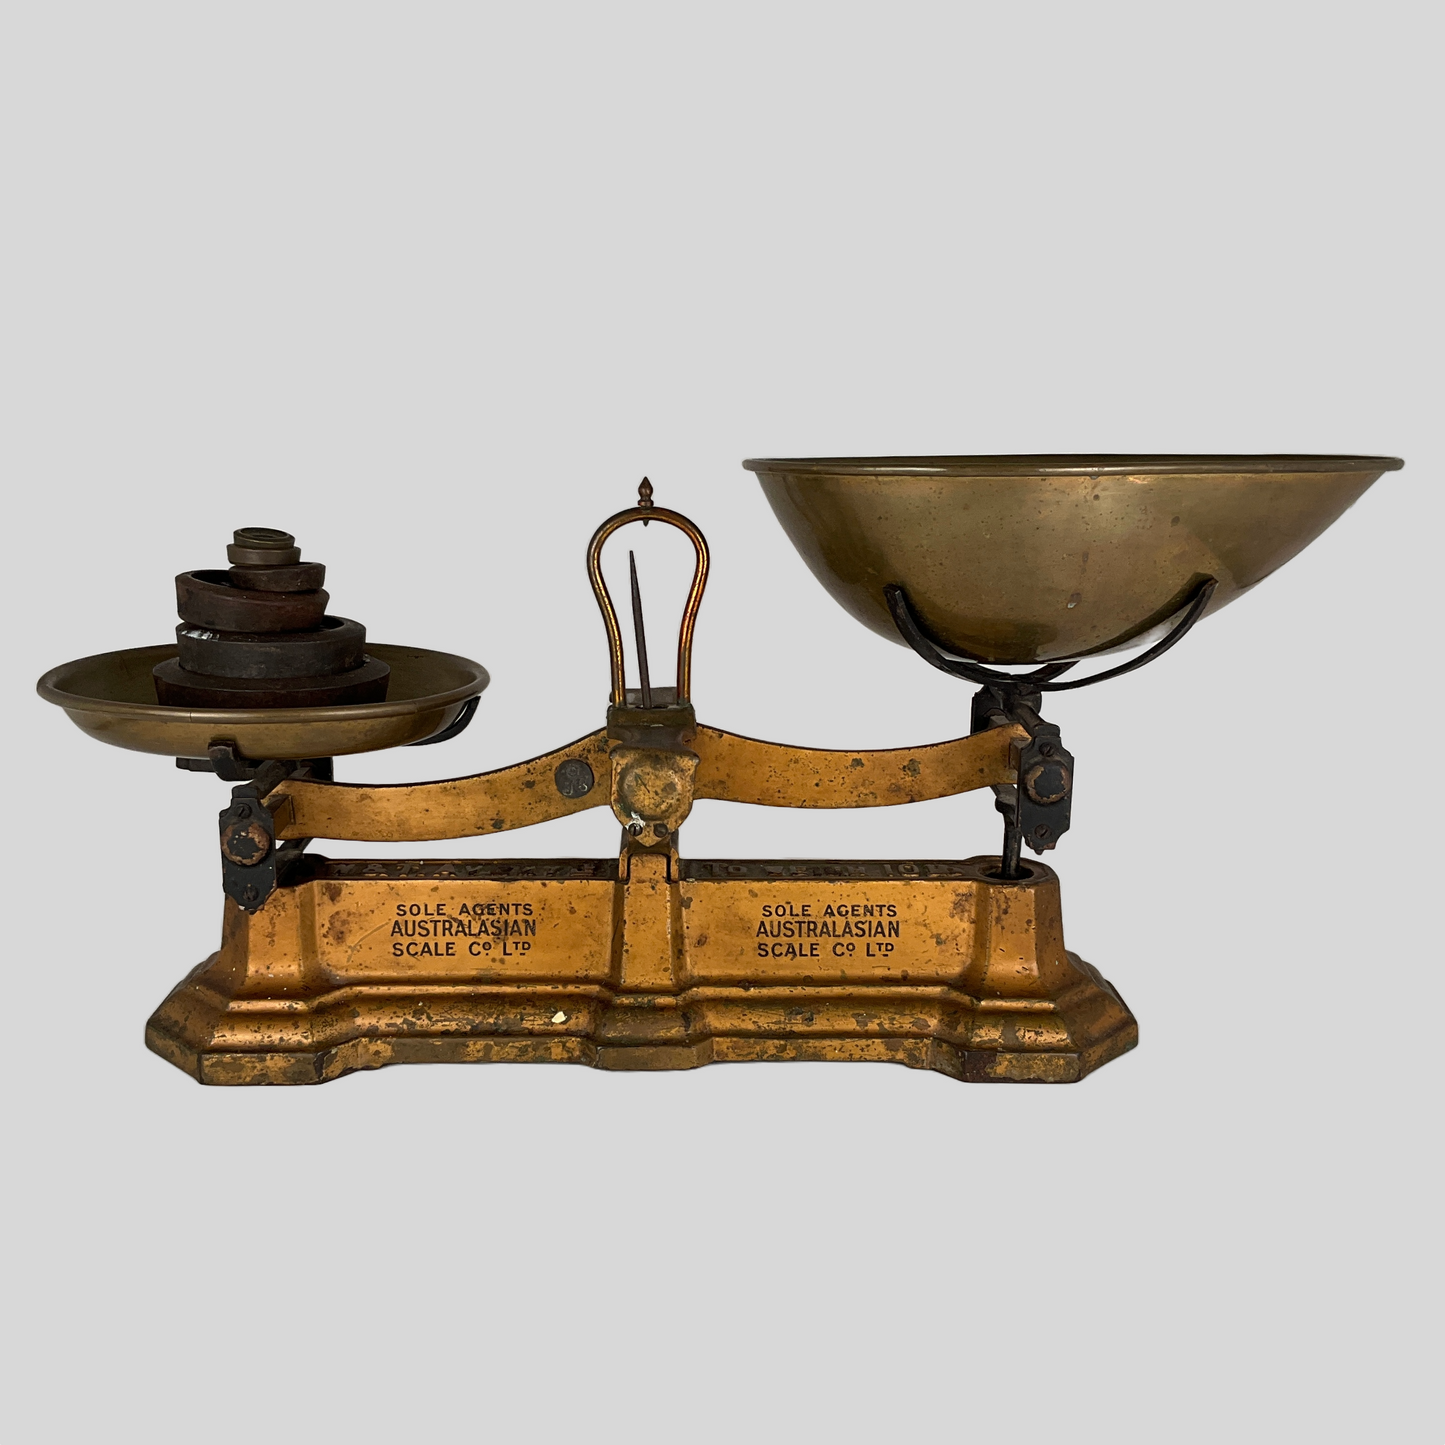 W & T Avery Ltd - Vintage Weigh Scales